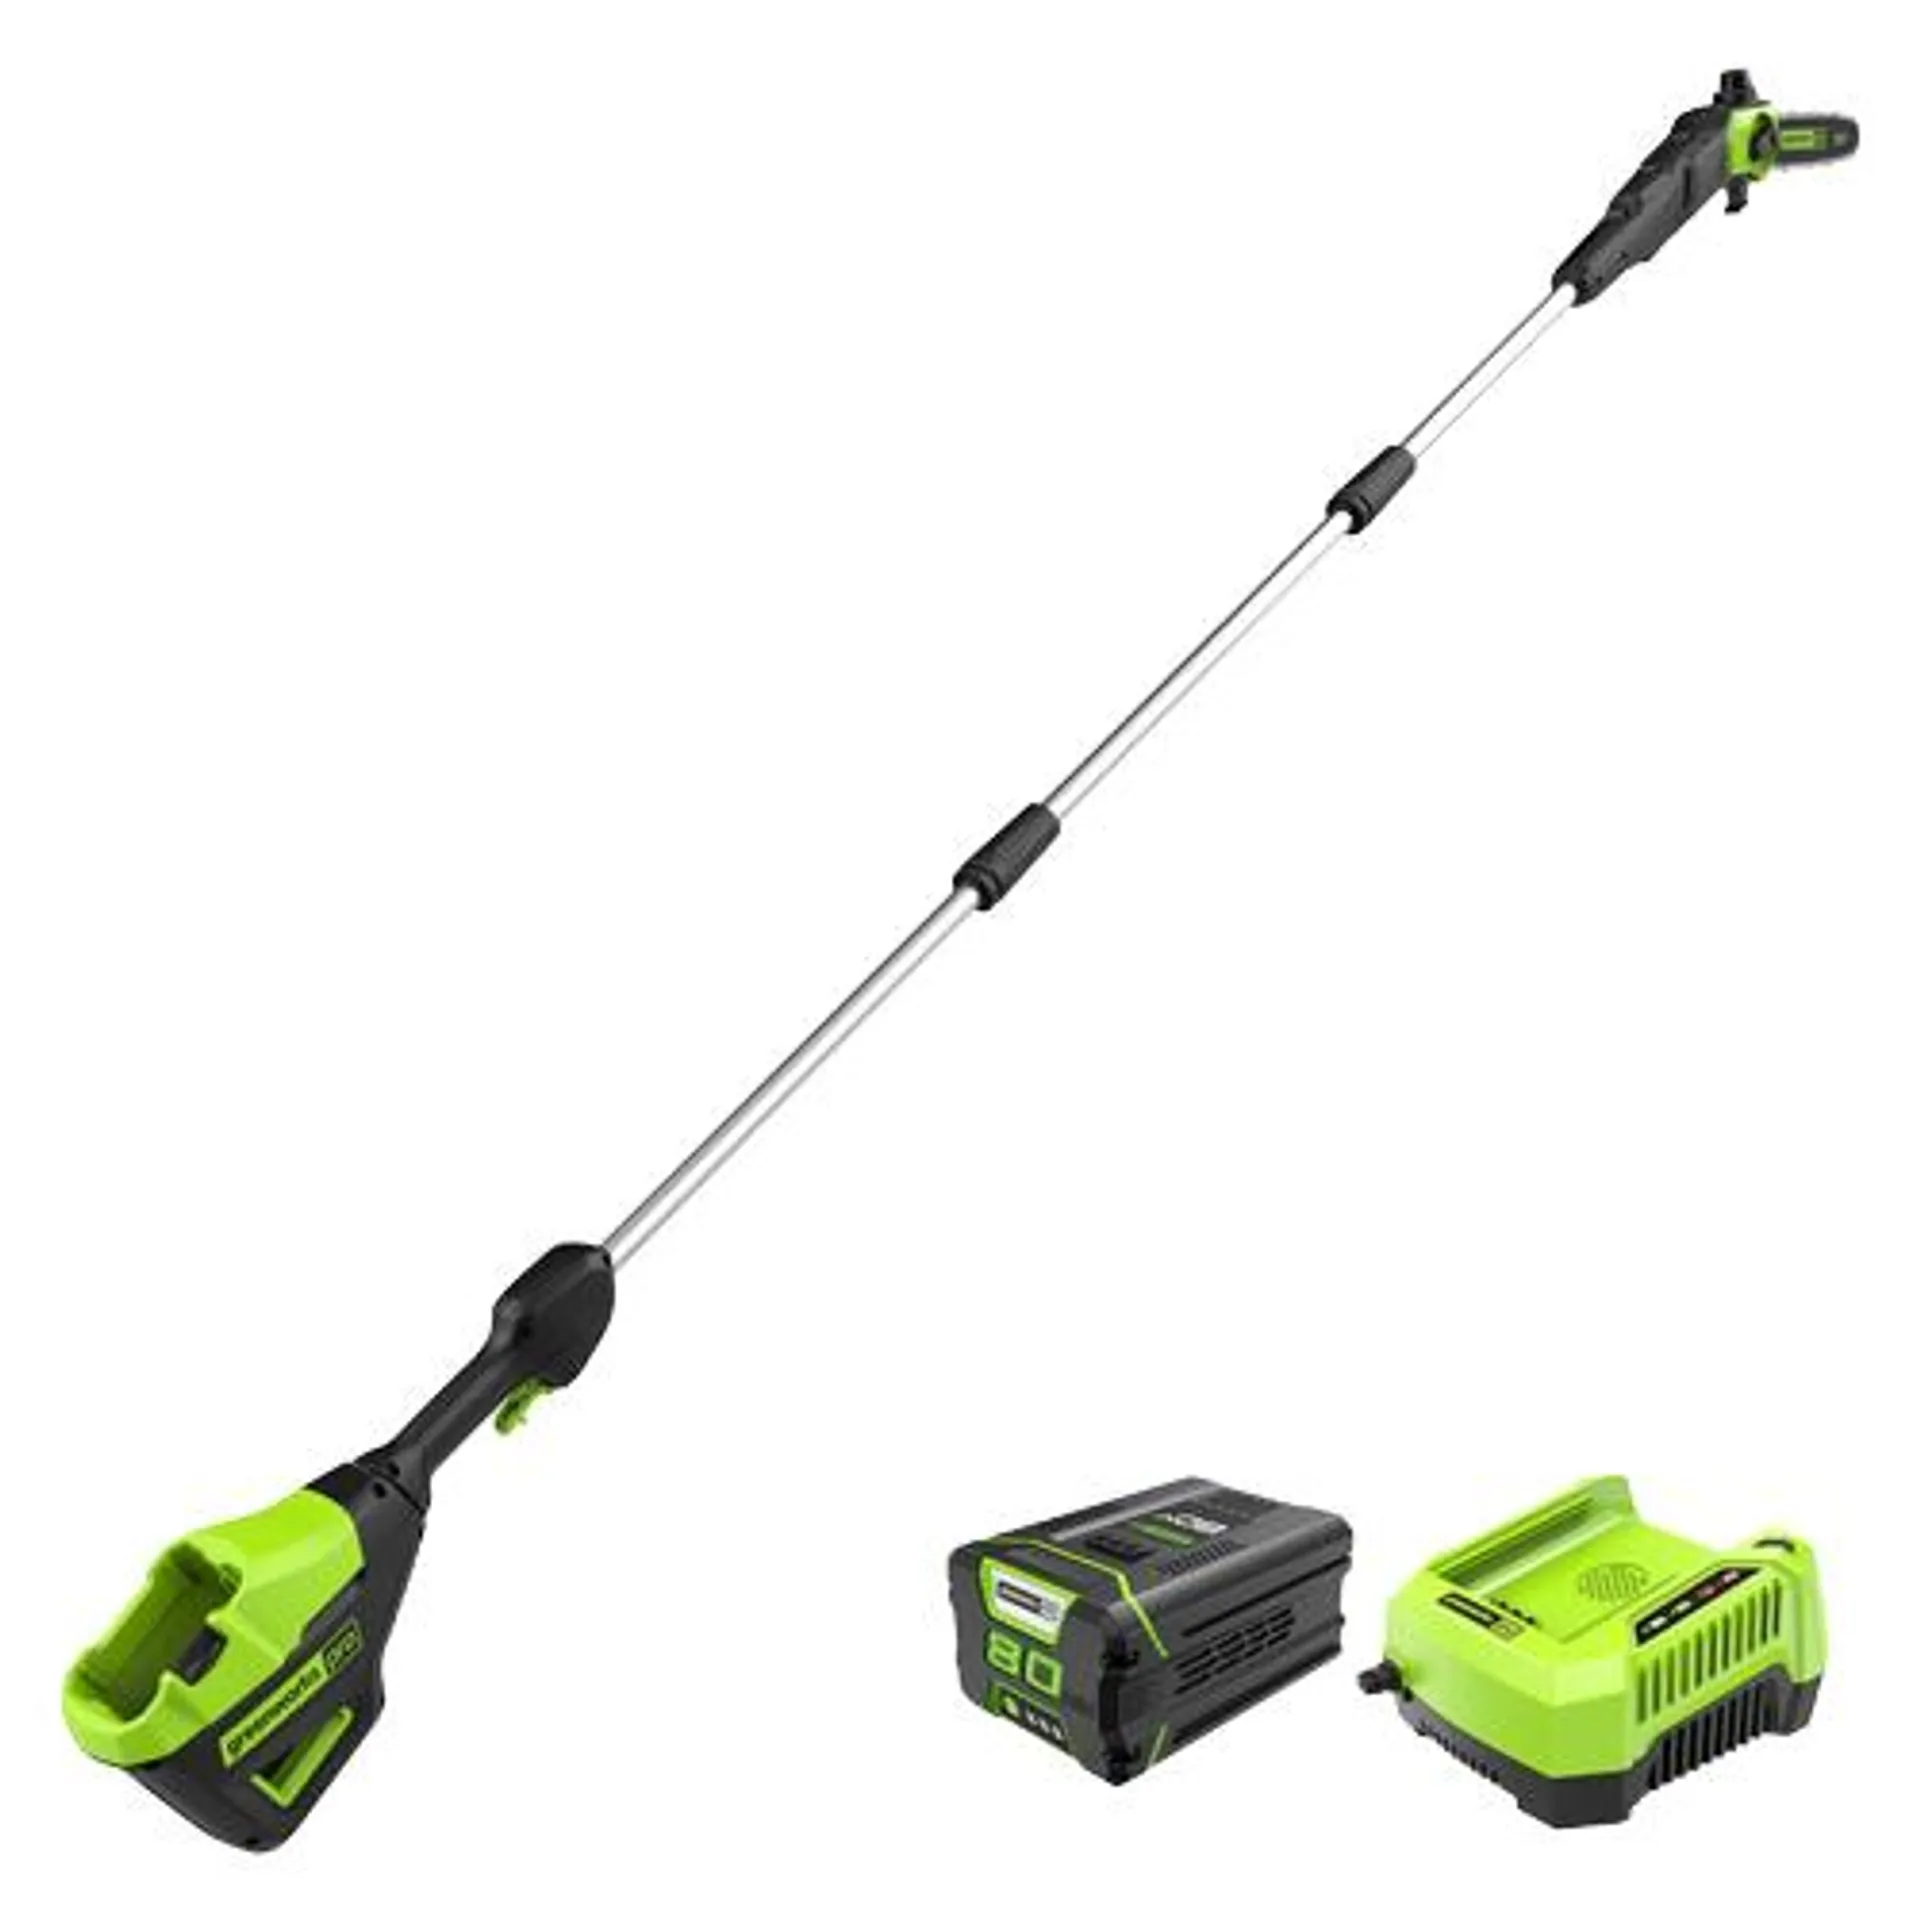 Greenworks 80V 10" Cordless Battery Pole Saw w/ 2.0 Ah Battery & Rapid Charger